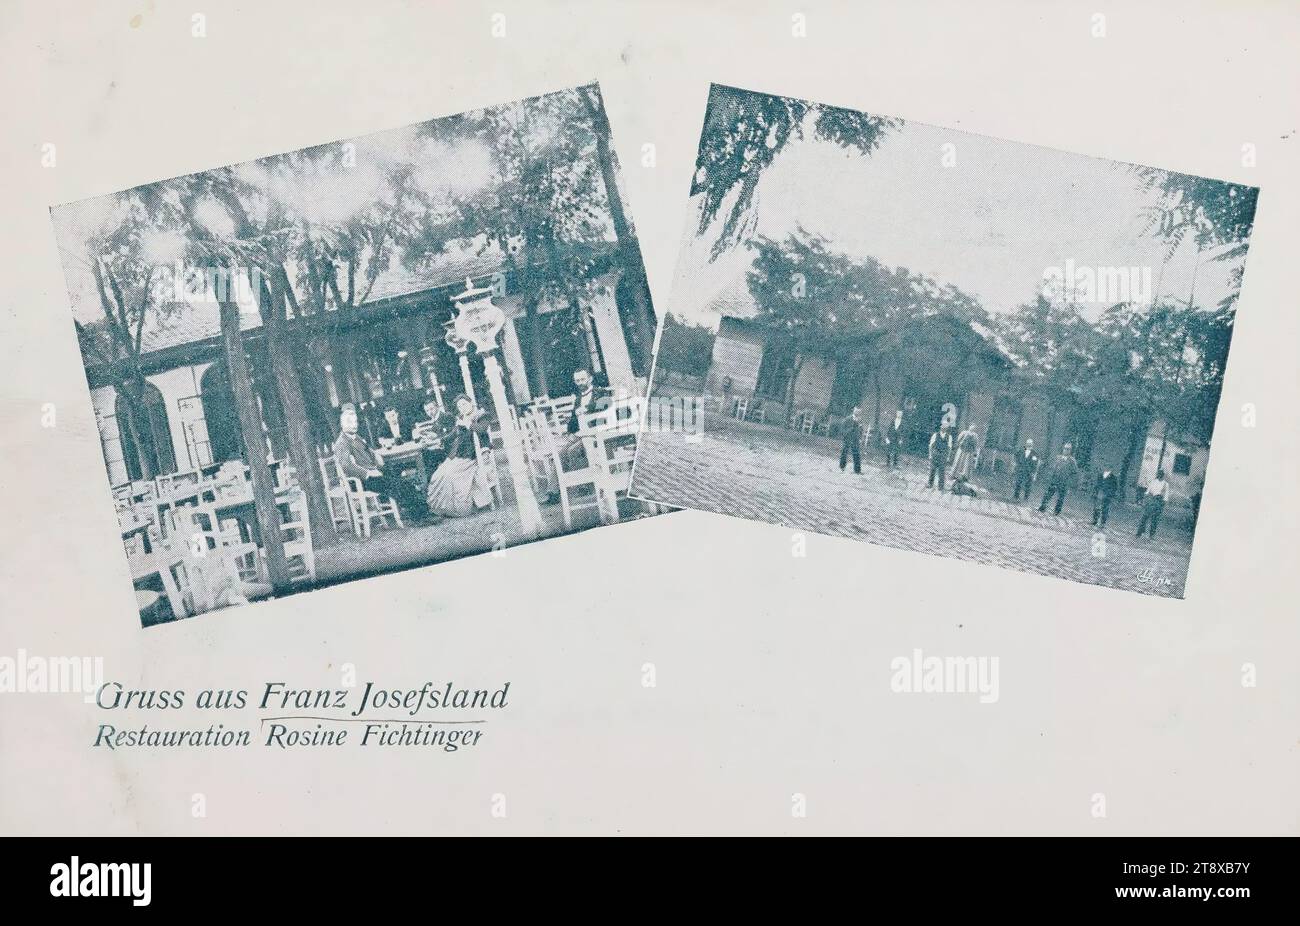 22nd, Franz-Josefs-Land (Alte Donau) - Restauration Rosine Fichtinger, picture postcard, unknown, 1900-1905, coated cardboard, halftone print, height×width 9×14 cm, food and drink, recreation and leisure, hotel and restaurant business, 22nd district: Donaustadt, with people, The Vienna Collection Stock Photo